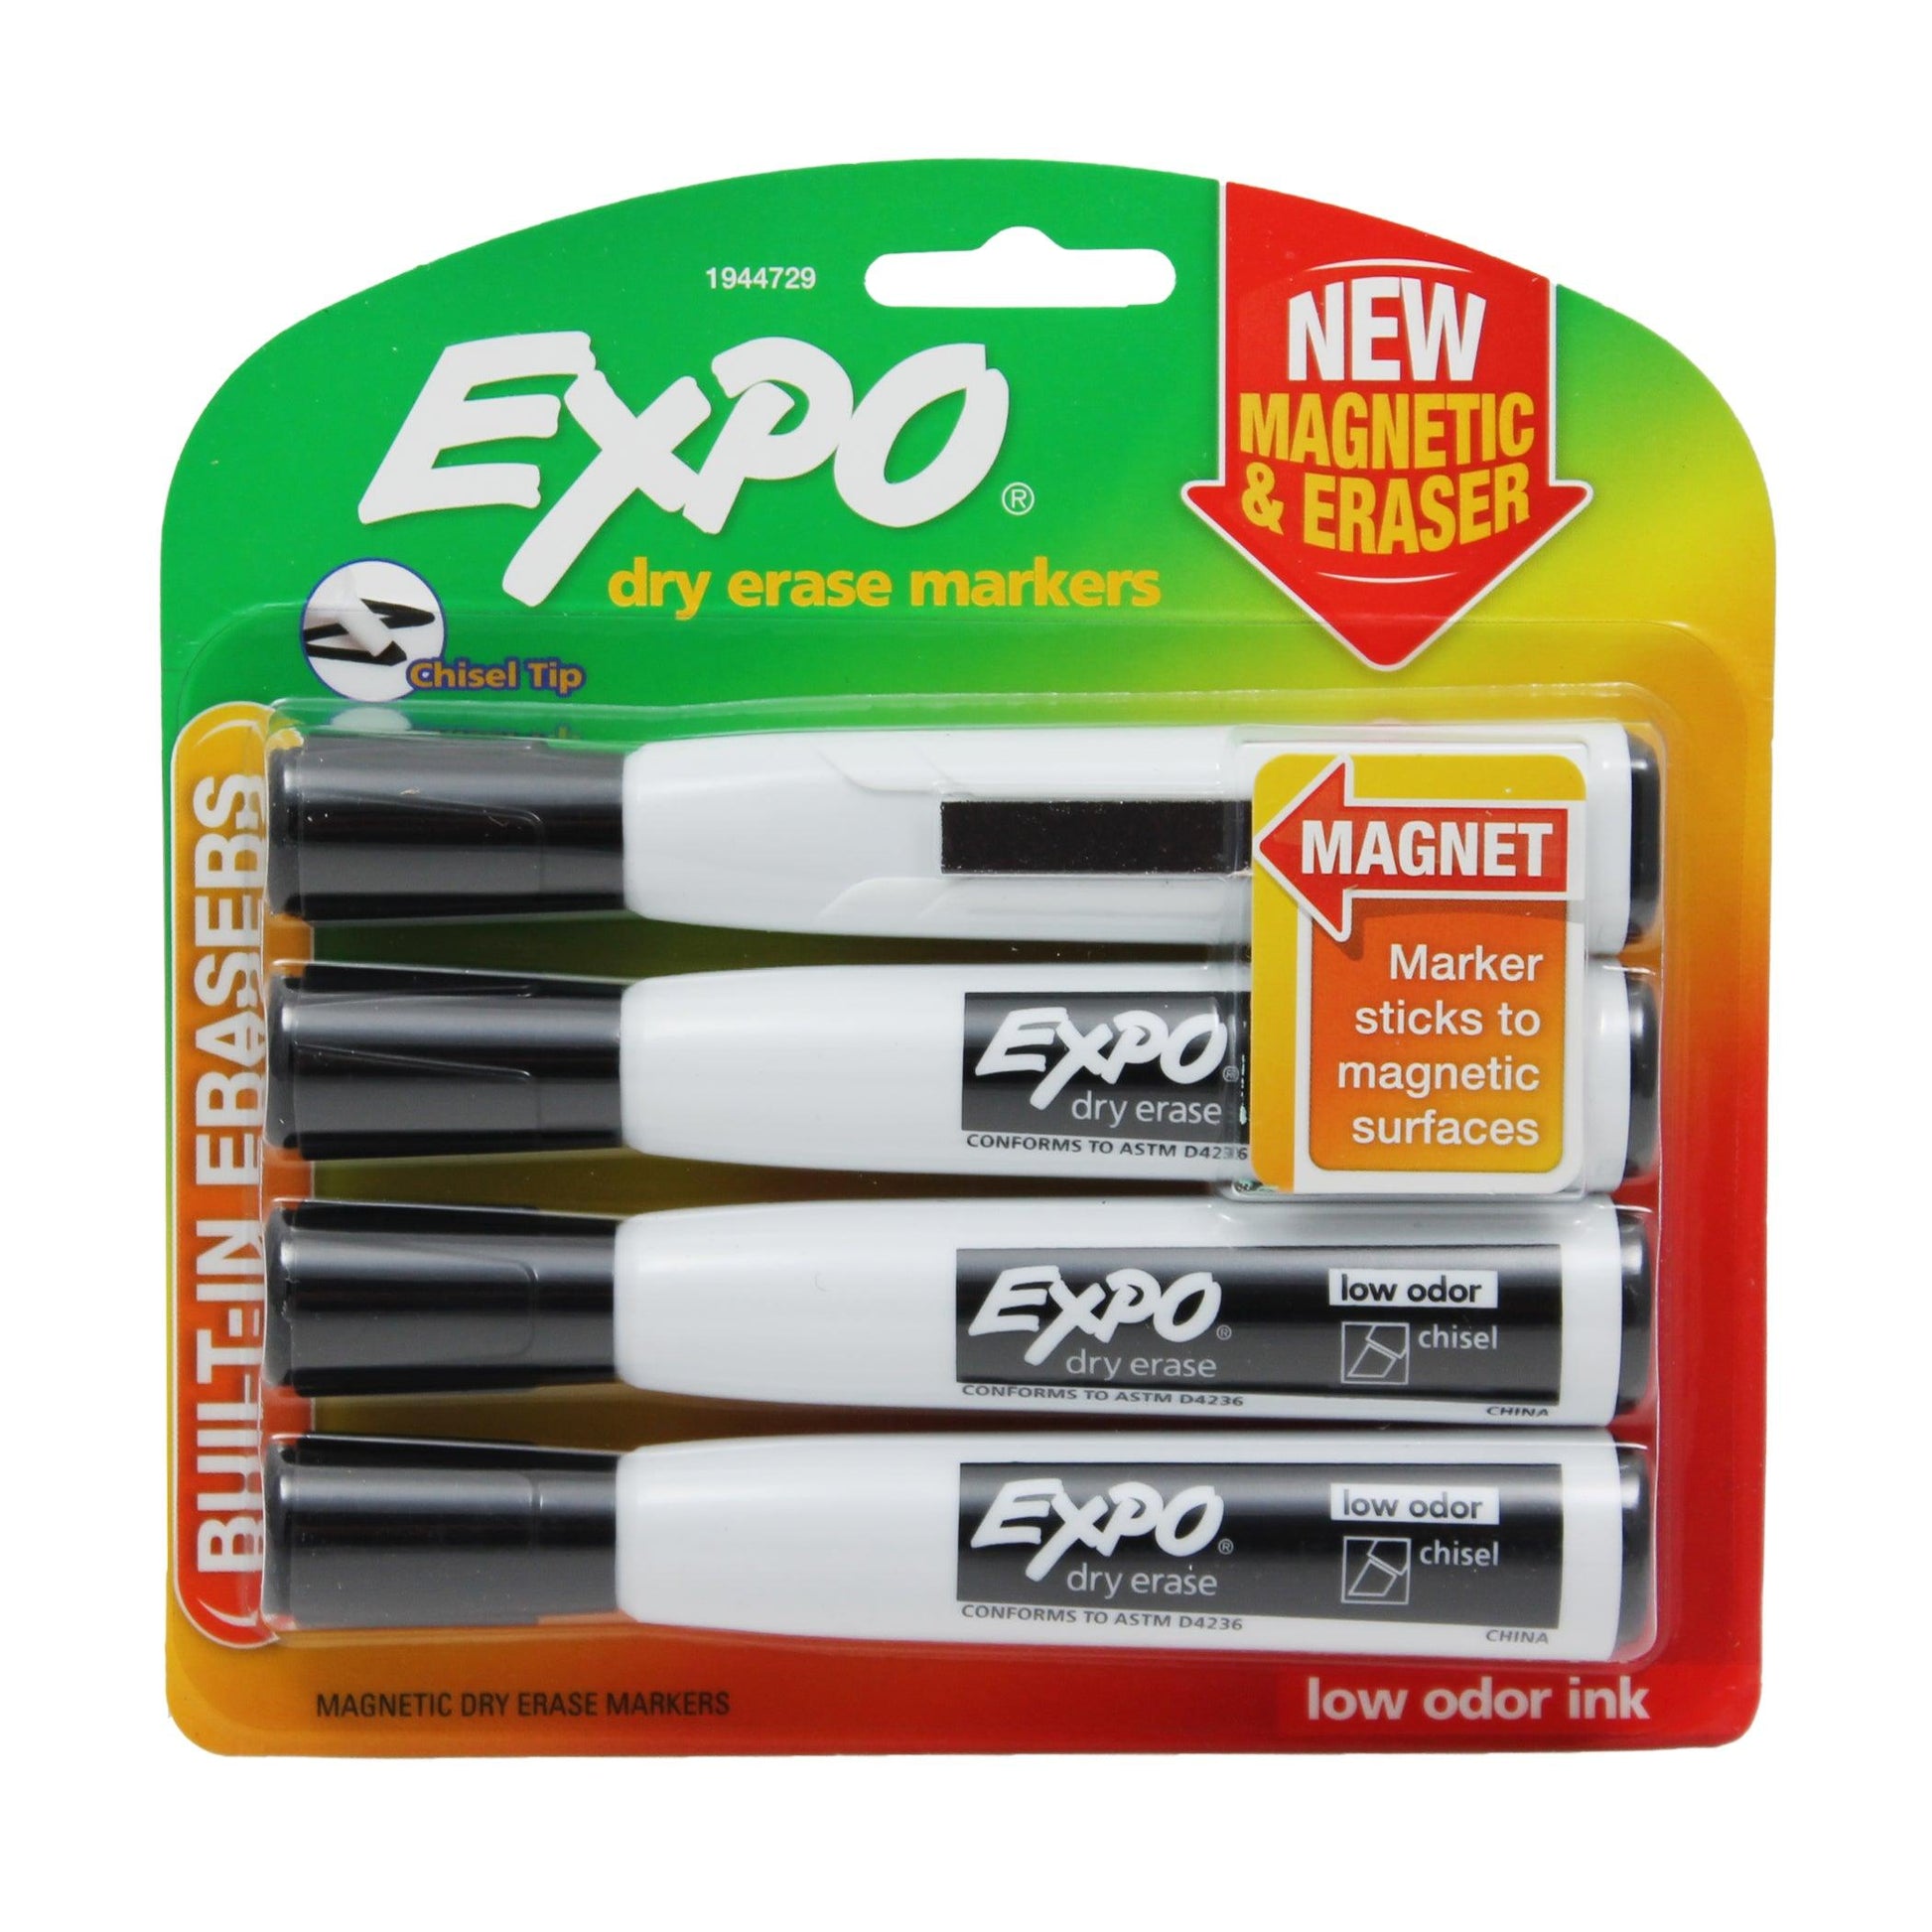 Magnetic Dry Erase Markers with Eraser, Chisel Tip, Black, 4 Per Pack, 3 Packs - Loomini